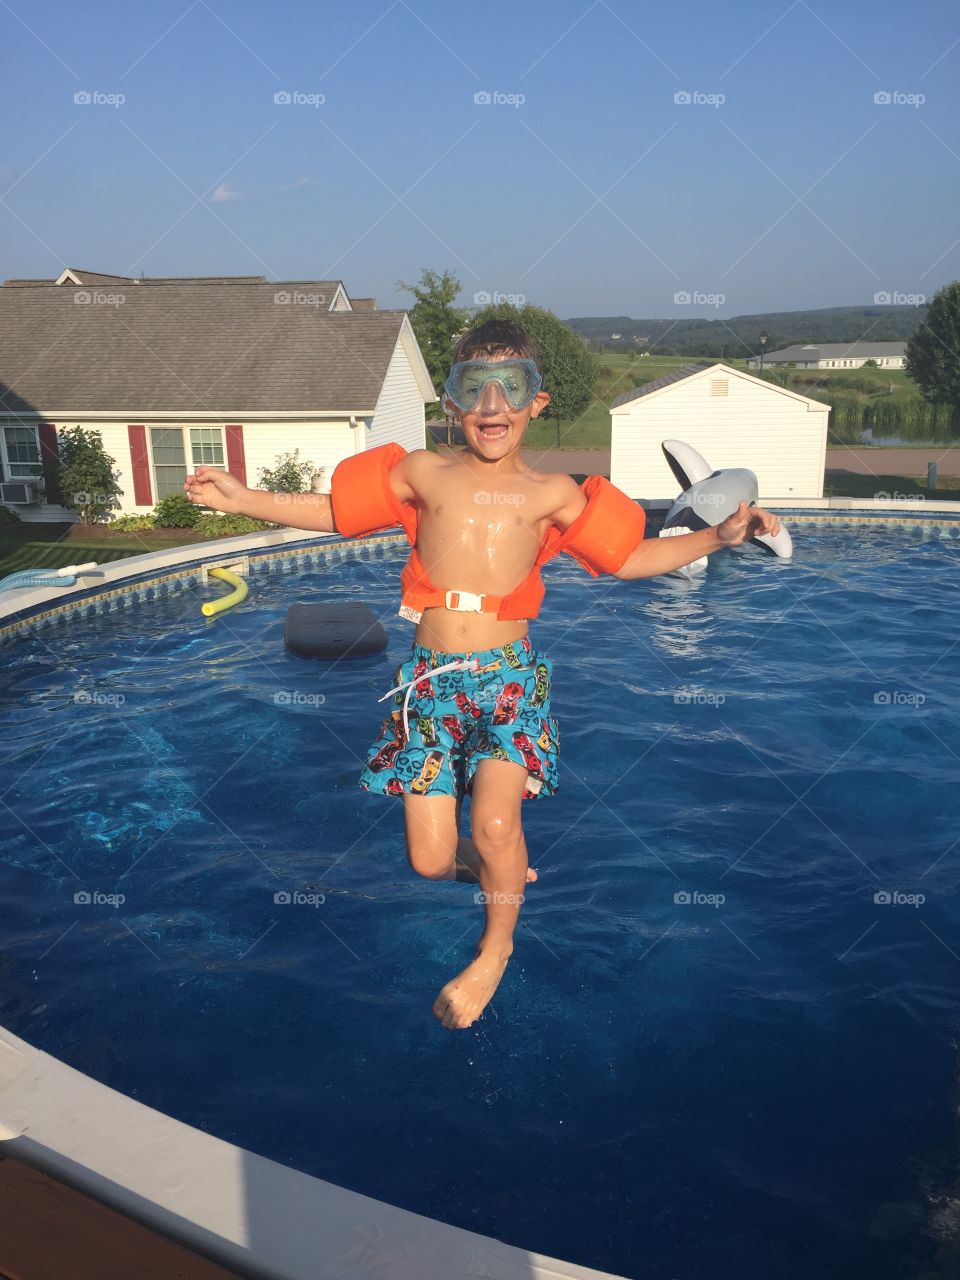 Boy jumping in swimming pool with armband